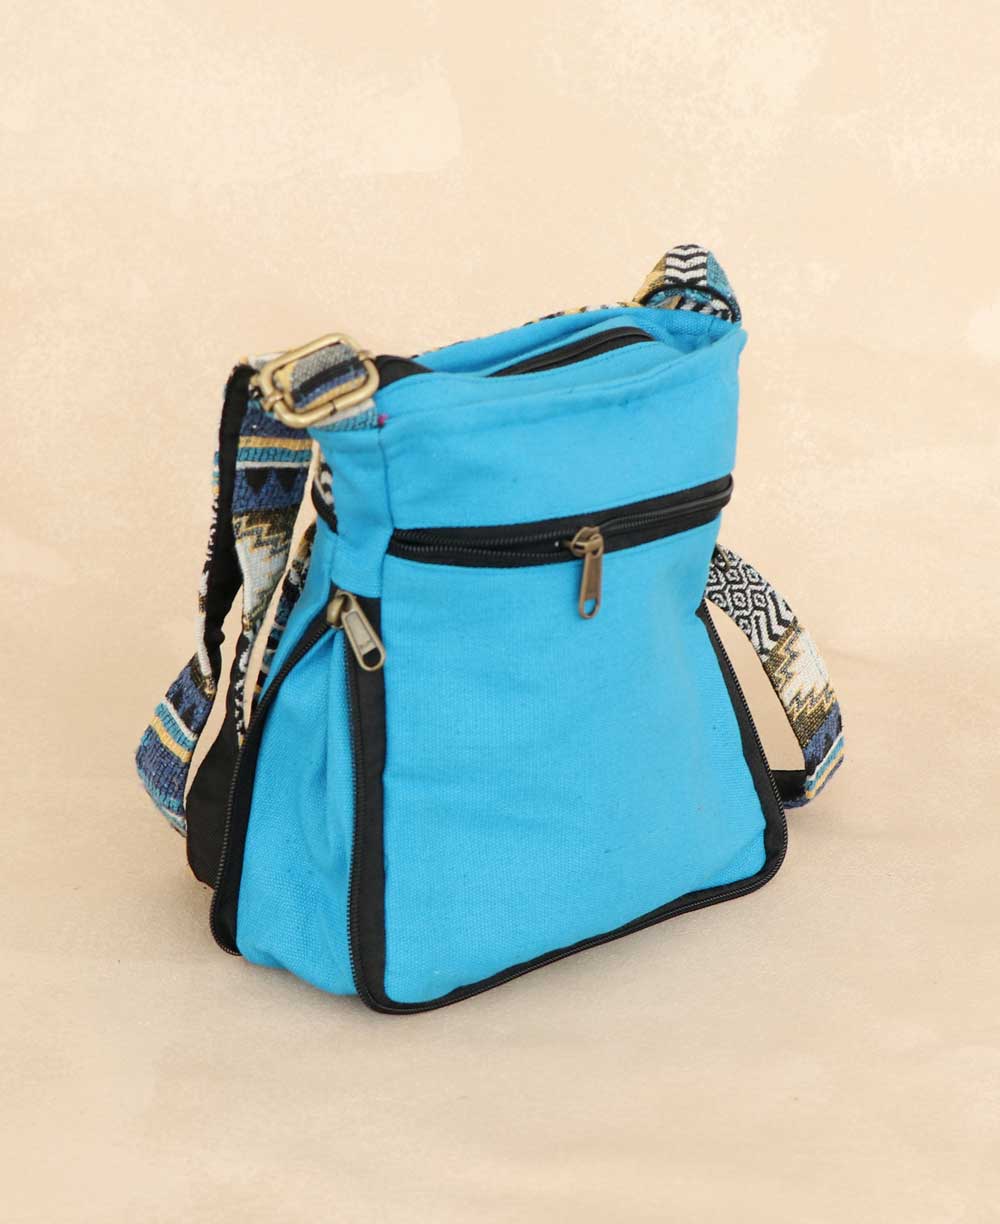 Back view of the Trendy Crossbody Cotton Bag